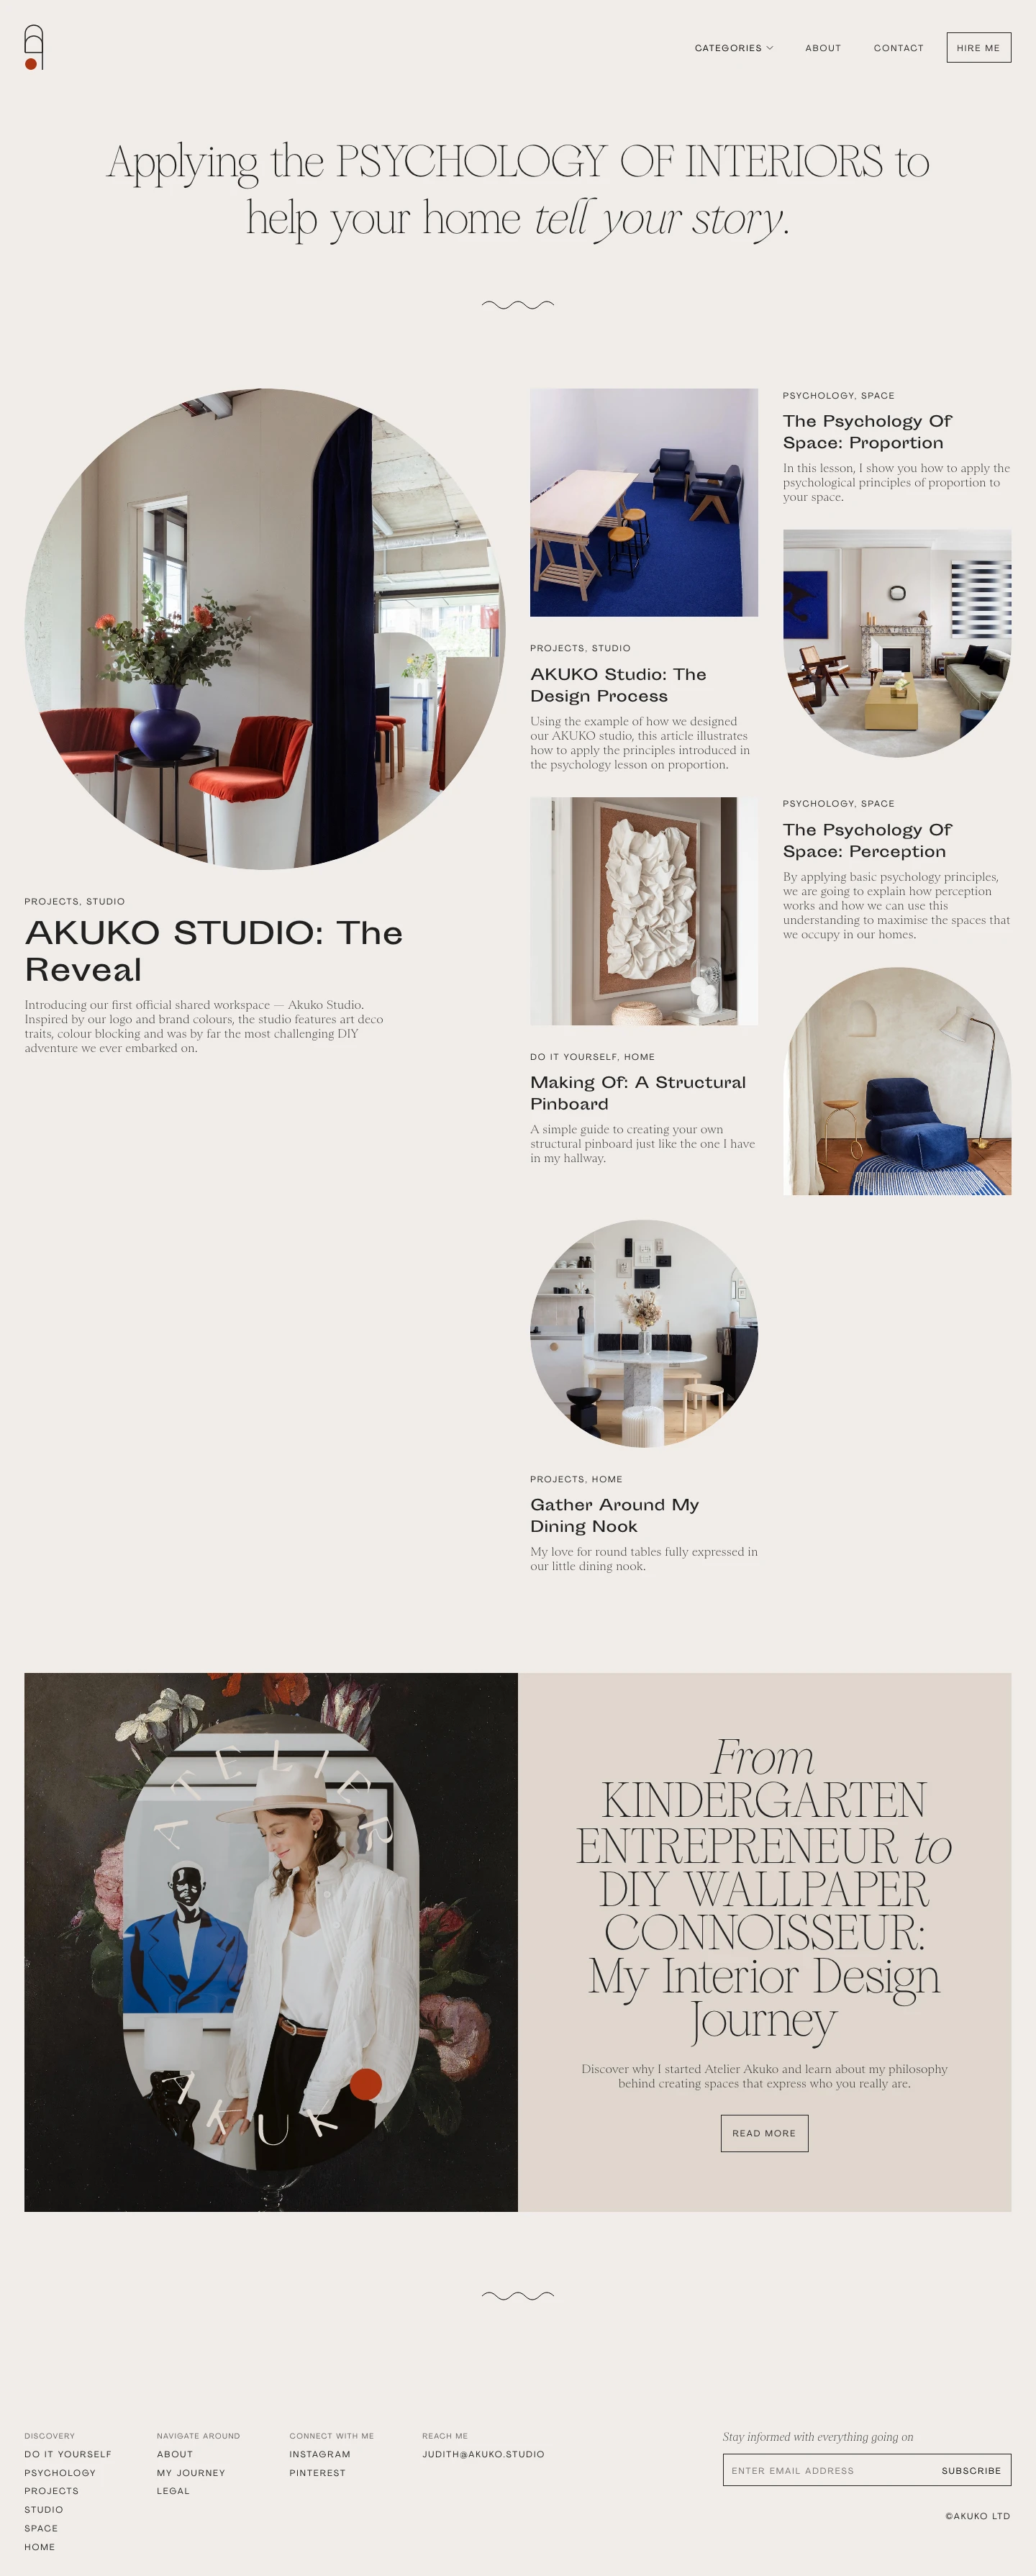 Atelier Akuko Landing Page Example: Applying the PSYCHOLOGY OF SPACE to help your home tell your story.